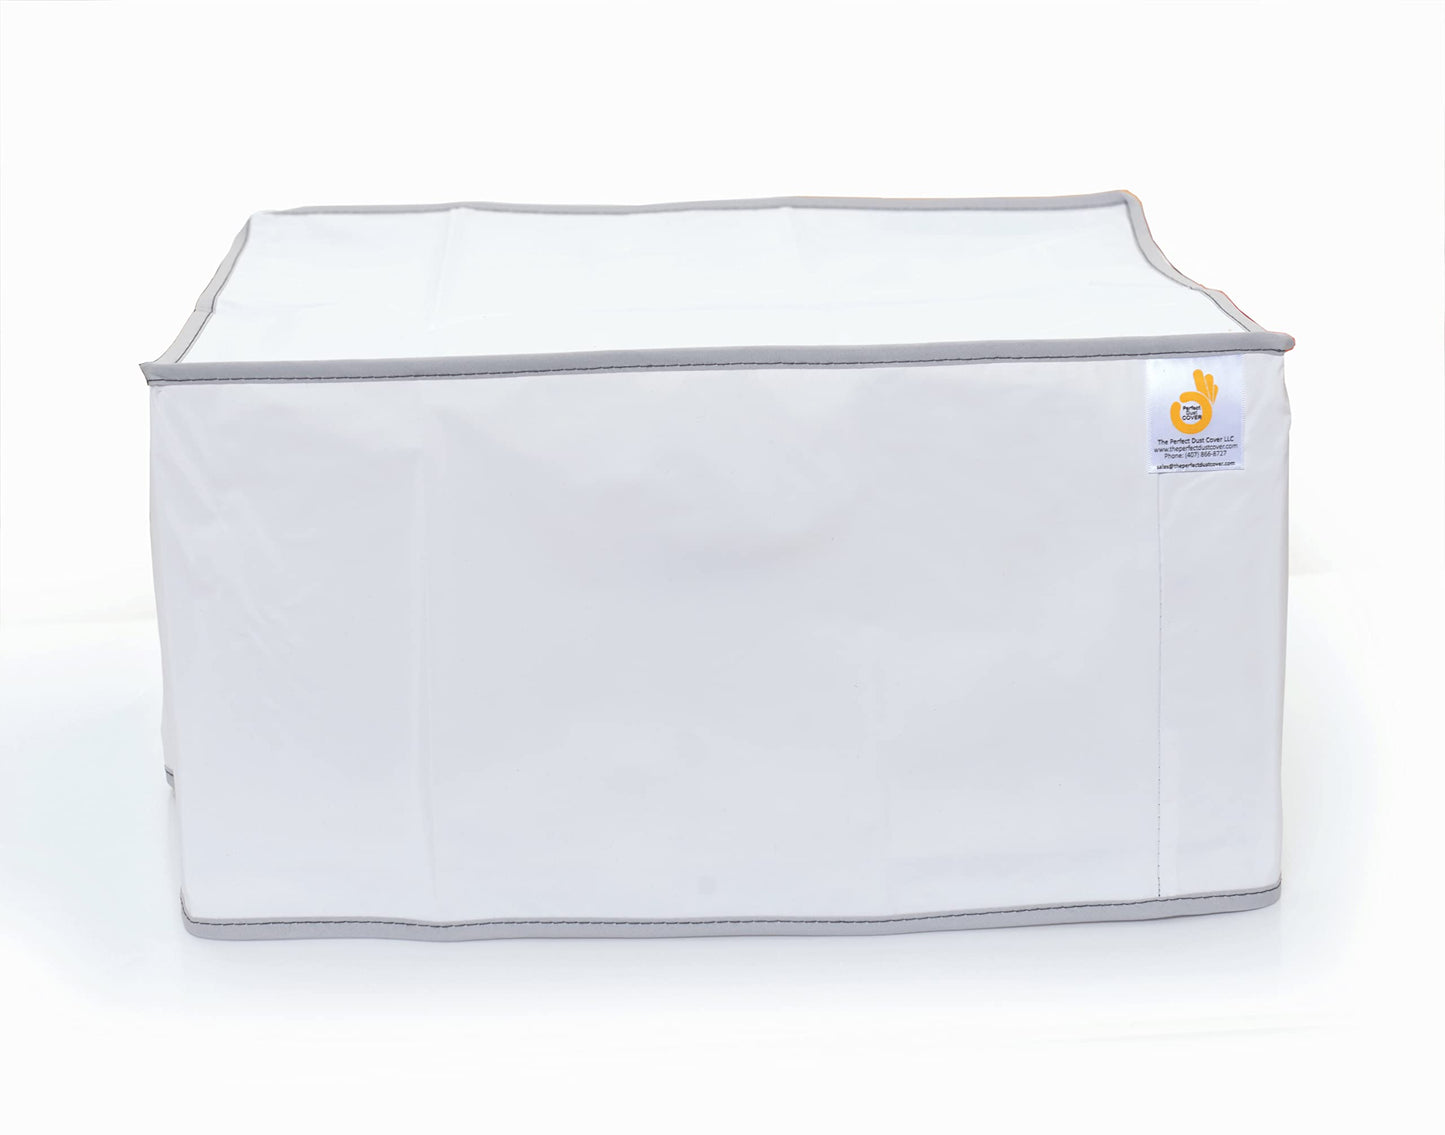 The Perfect Dust Cover, White Nylon Cover Compatible with HP Smart Tank 790 Wireless All-in-One Printer, Anti Static and Waterproof Dust Cover by The Perfect Dust Cover LLC